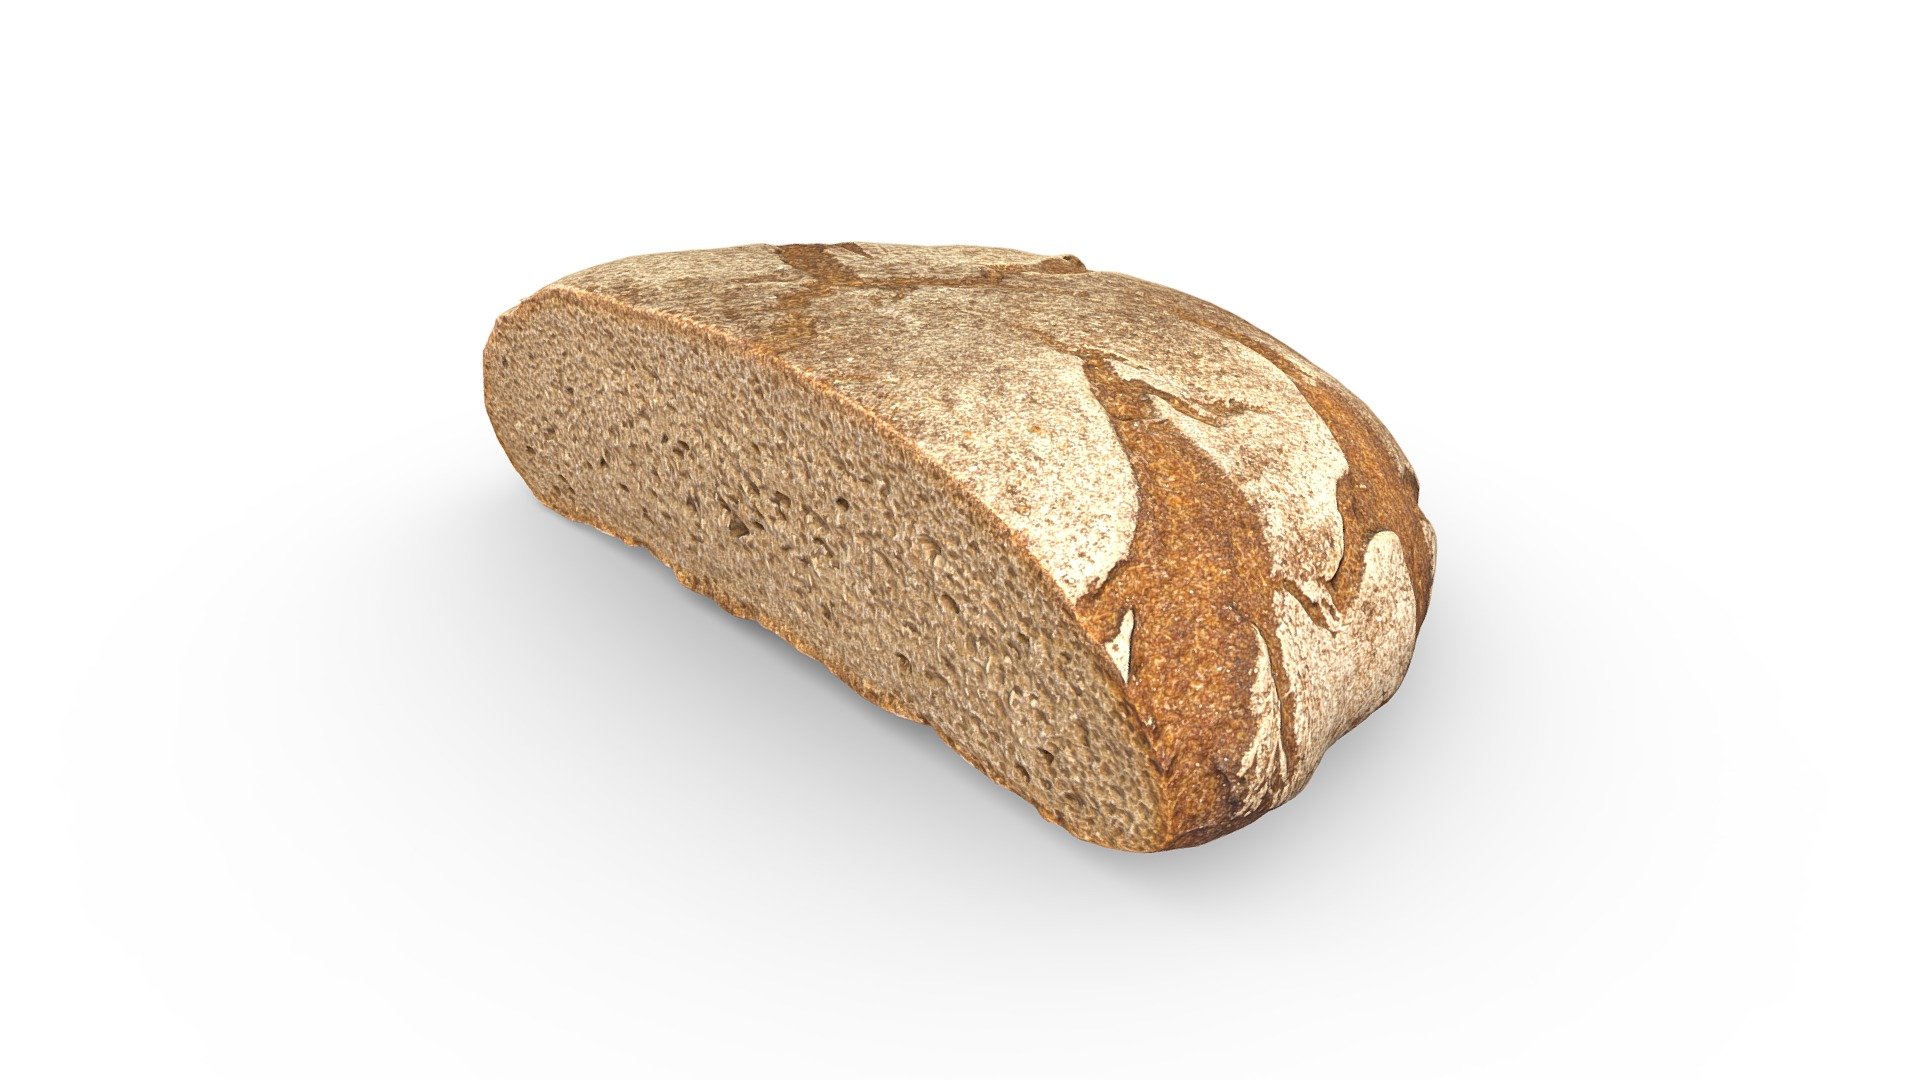 High-poly sliced bread photogrammetry scan. PBR texture maps 4096x4096 px. resolution for metallic or specular workflow. Scan from real food, high-poly 3D model, 4K resolution textures. Additional file contains source PNG texture maps.

Additional texture maps: AmbientOcclusion, BaseColor, Diffuse, Glossiness, Height, Metallic, MetallicSmoothness, Normal, Roughness, Specular, SpecularLevel, SpecularSmoothness 3d model